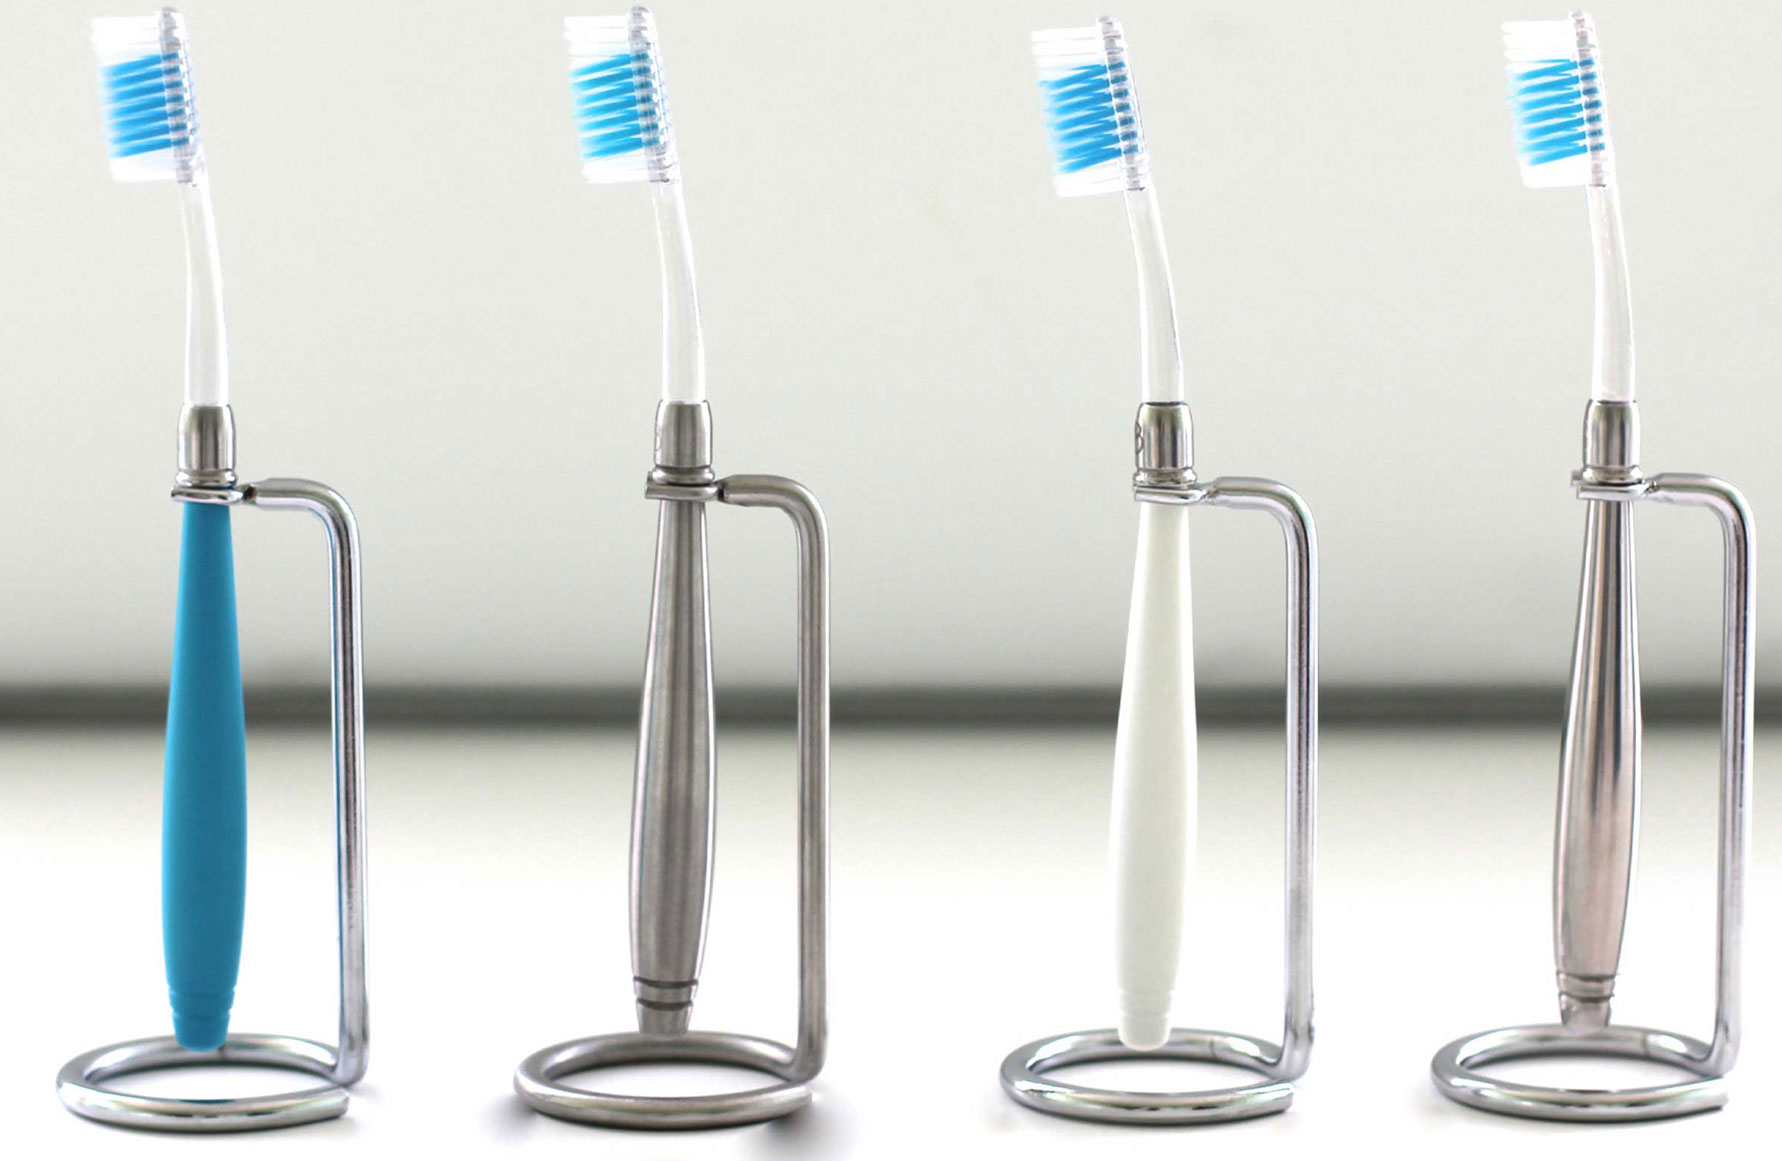 Classic Toothbrushes with Replaceable Subscription Brush Heads by MaverickBrothers.com